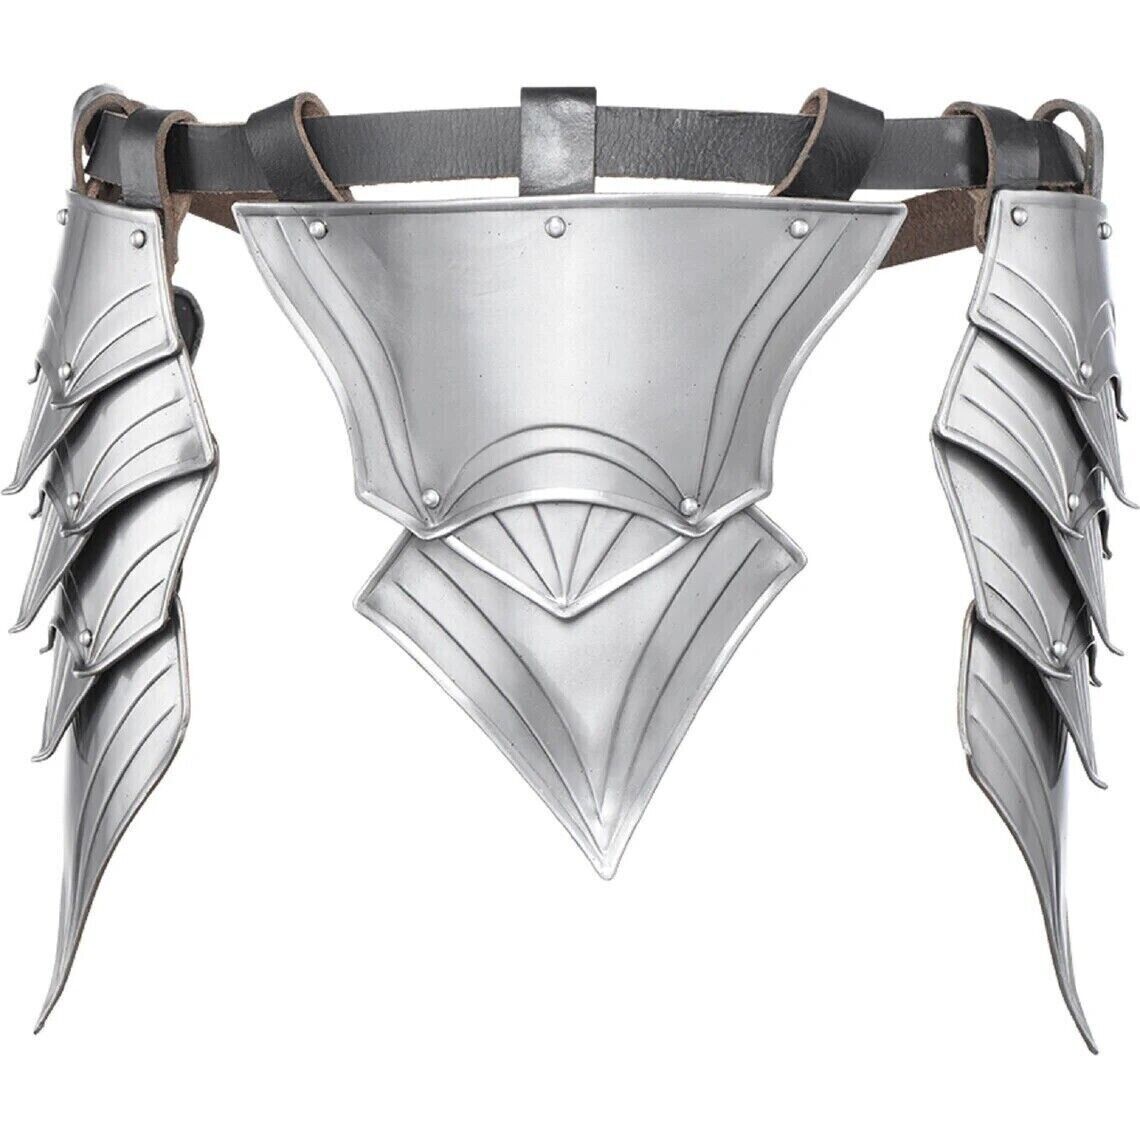 Fully protected by the steel cuirass or harness of your choice, you can advance